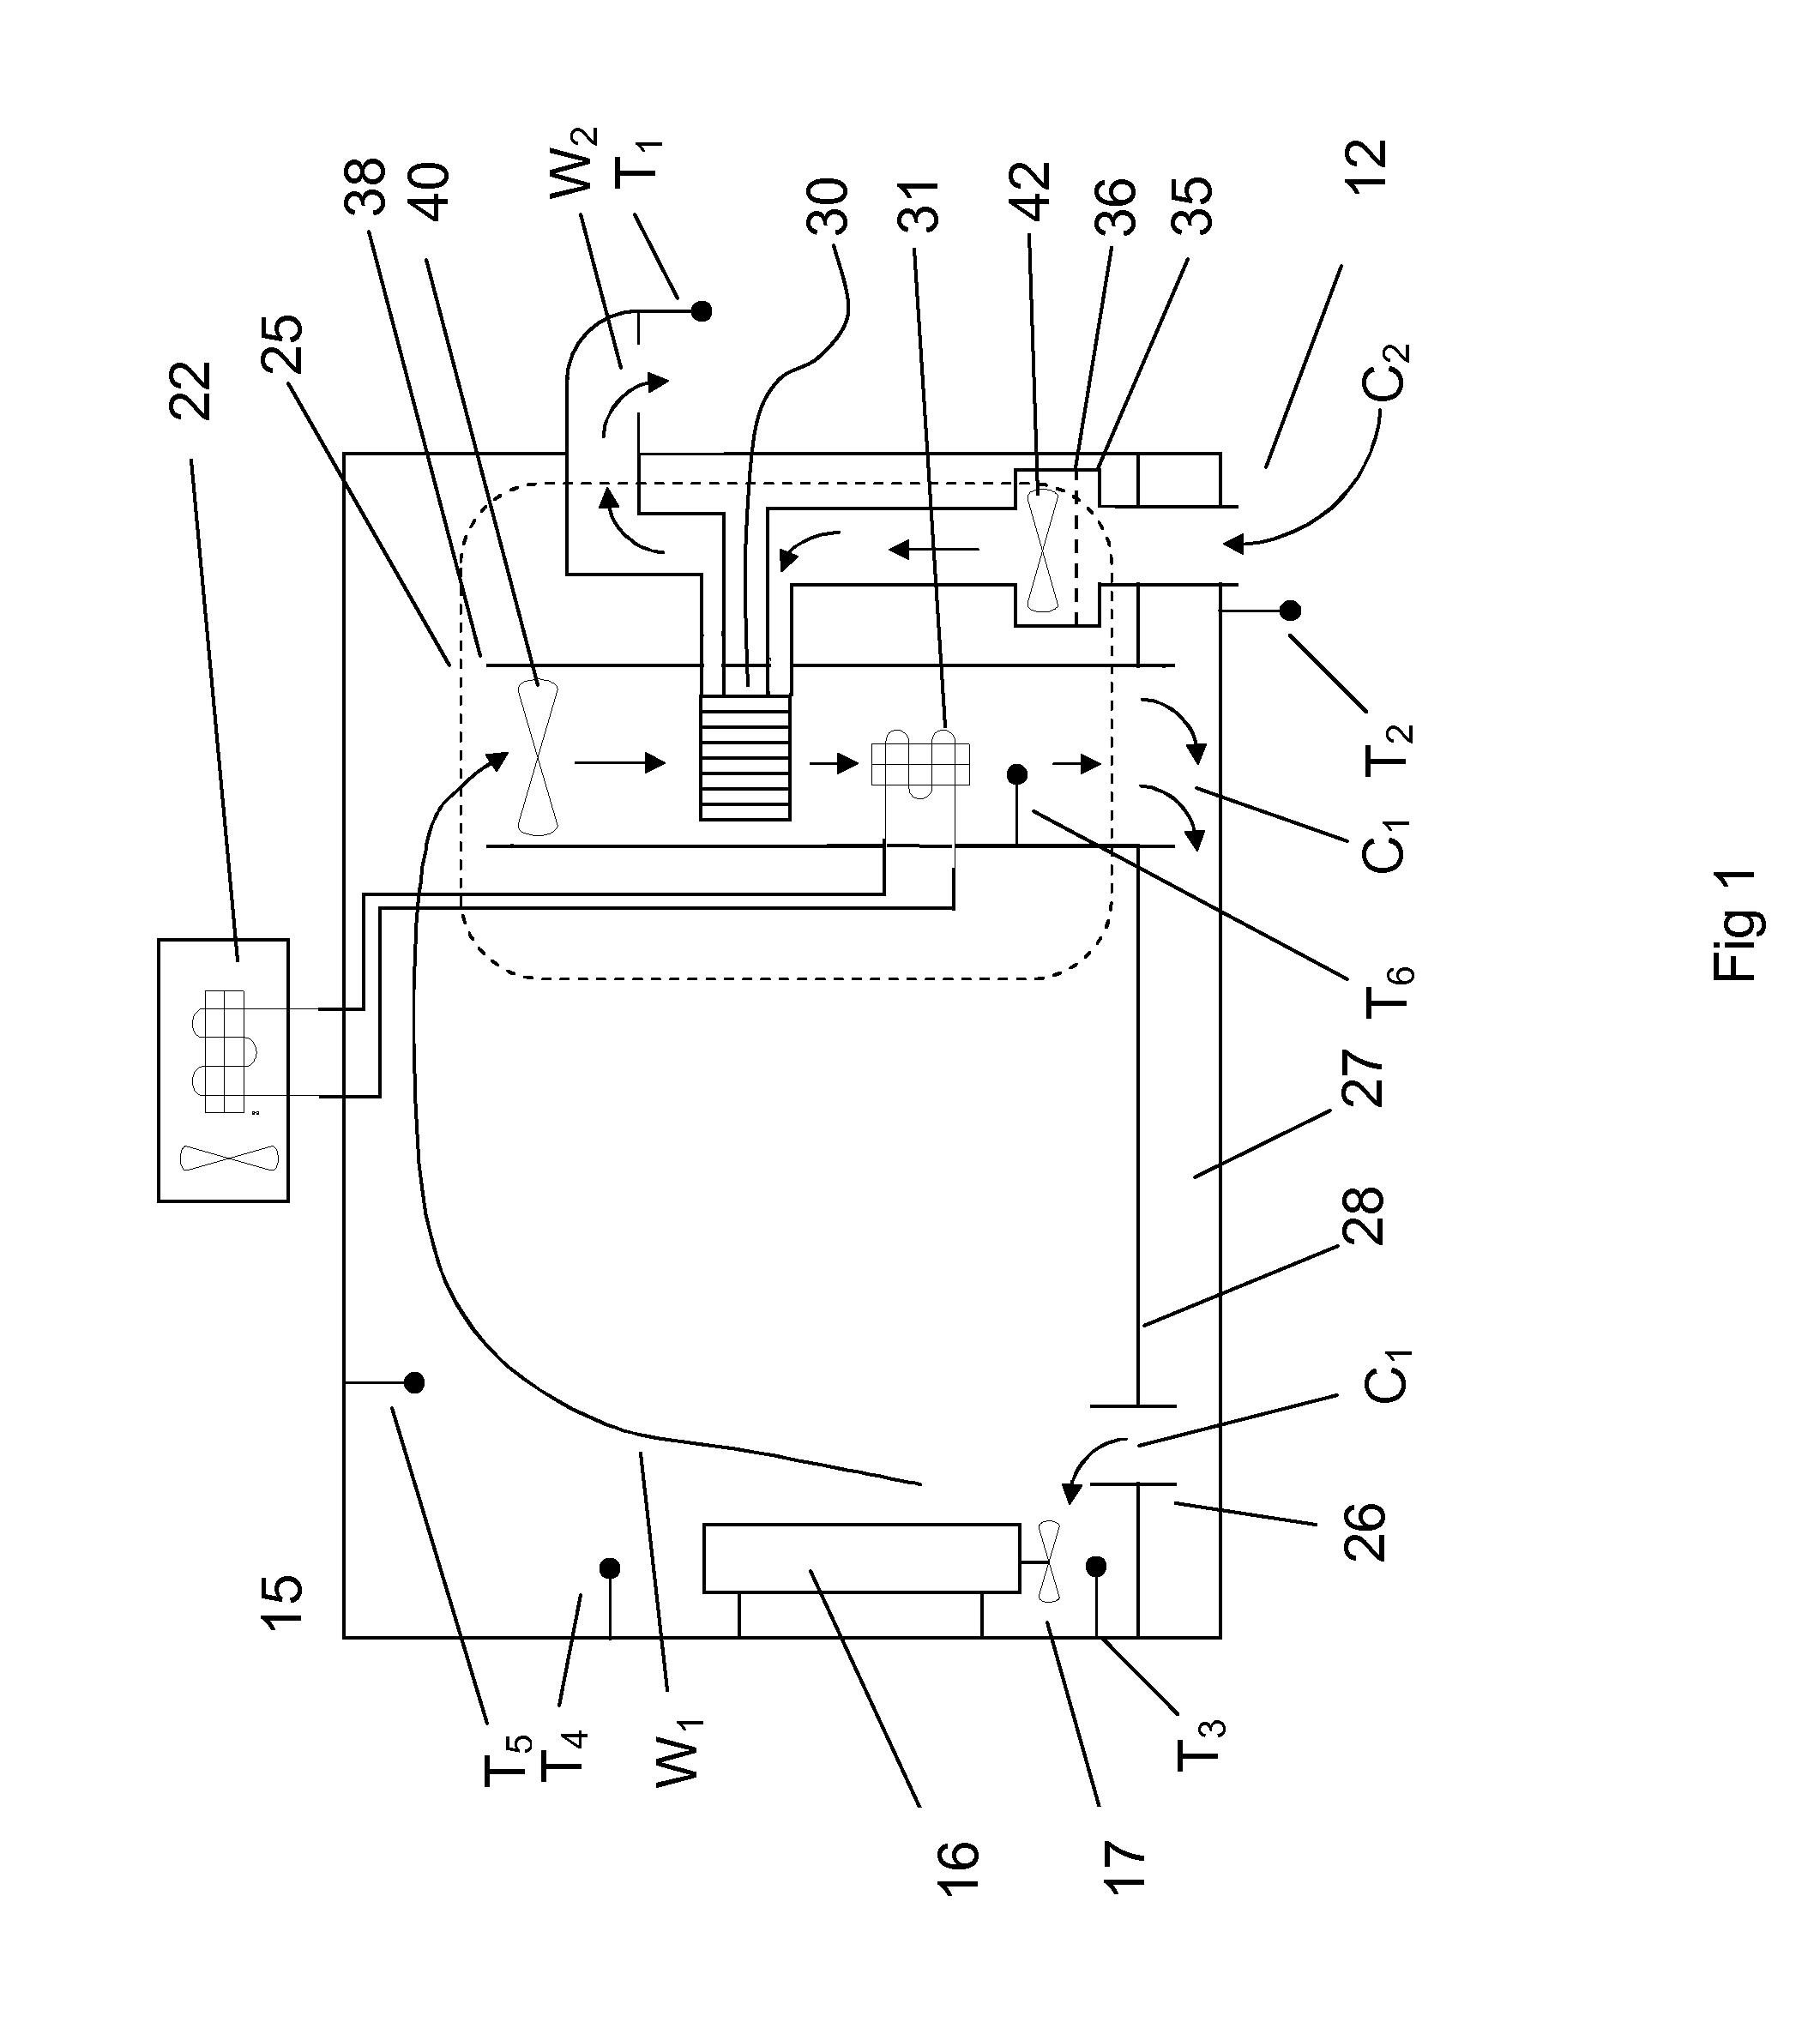 Electrical Room Of An Industrial Equipment Such As A Container Crane, The Electrical Room Comprising A Cooling Device